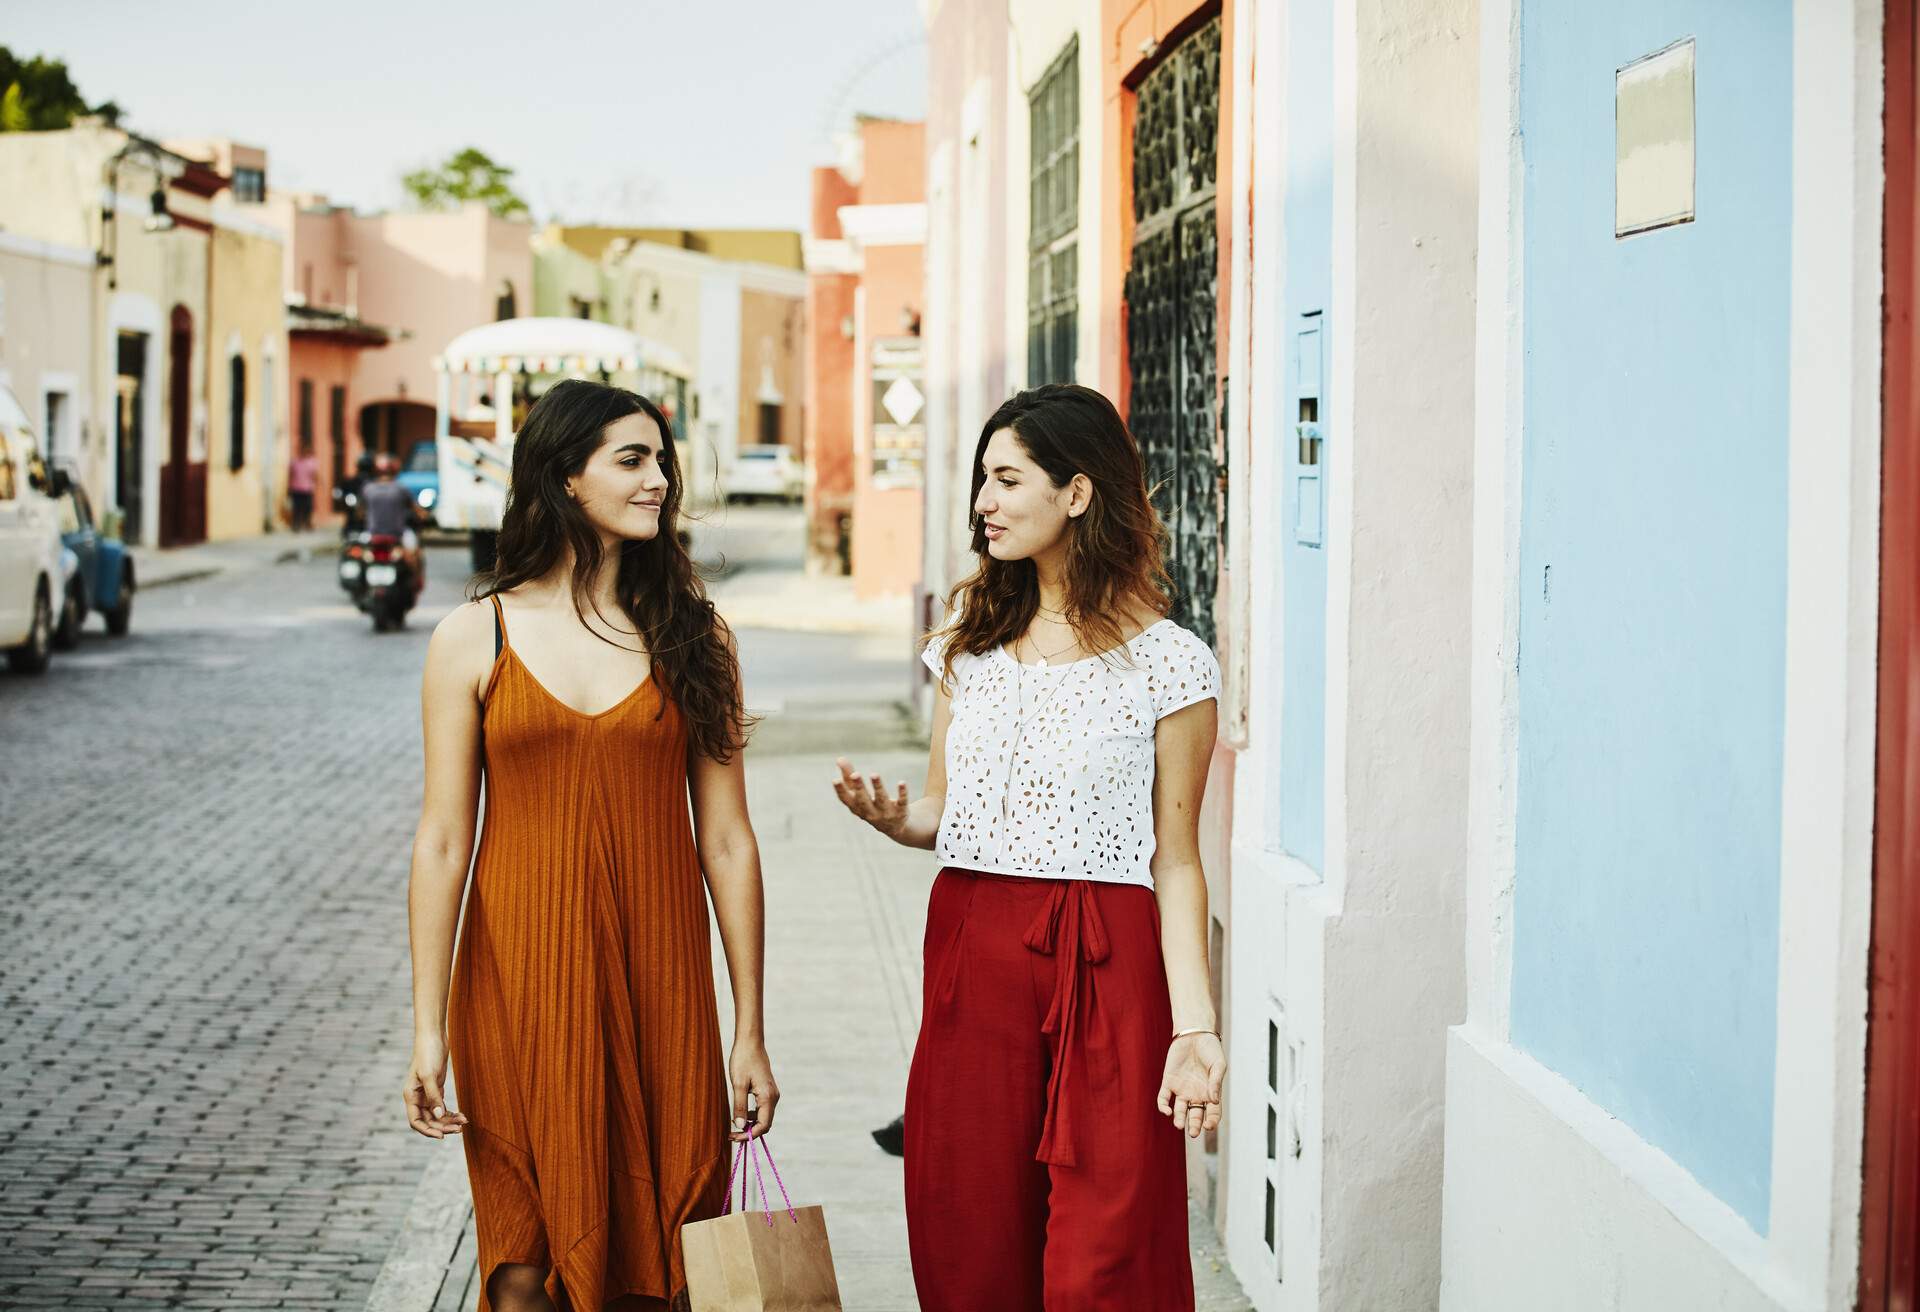 dest_mexico_theme_friendship_shopping_gettyimages-961904578_universal_within-usage-period_88105